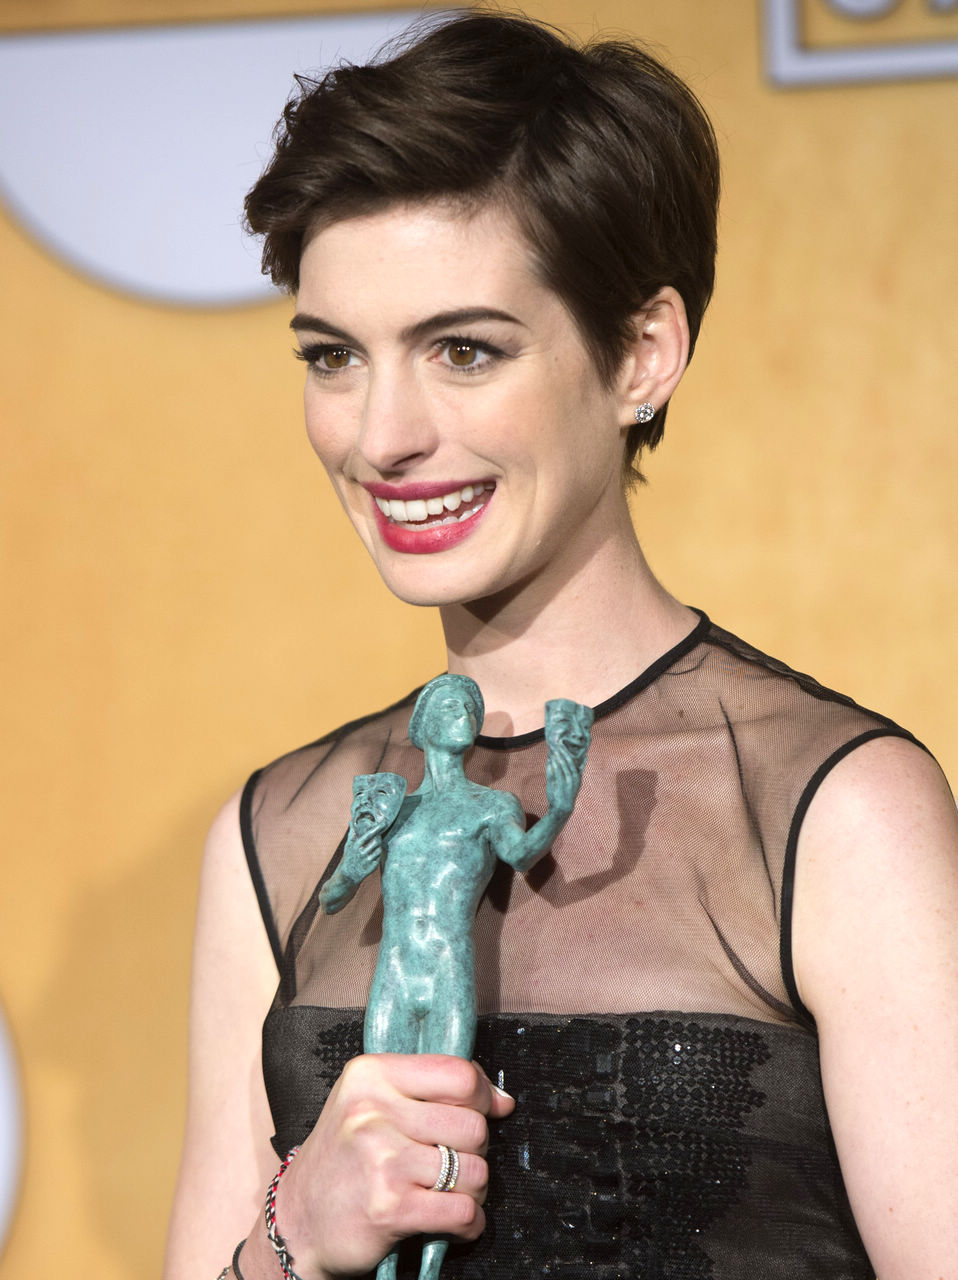 Actress Anne Hathaway accepts the award for Outstanding Performance by a Female Actor in a Supporting Role for “Les Miserables” onstage during the 19th Annual Screen Actors Guild Awards held at The Shrine Auditorium on Jan. 27, 2013 in Los Angeles, California. (Xinhua/Yang Lei)